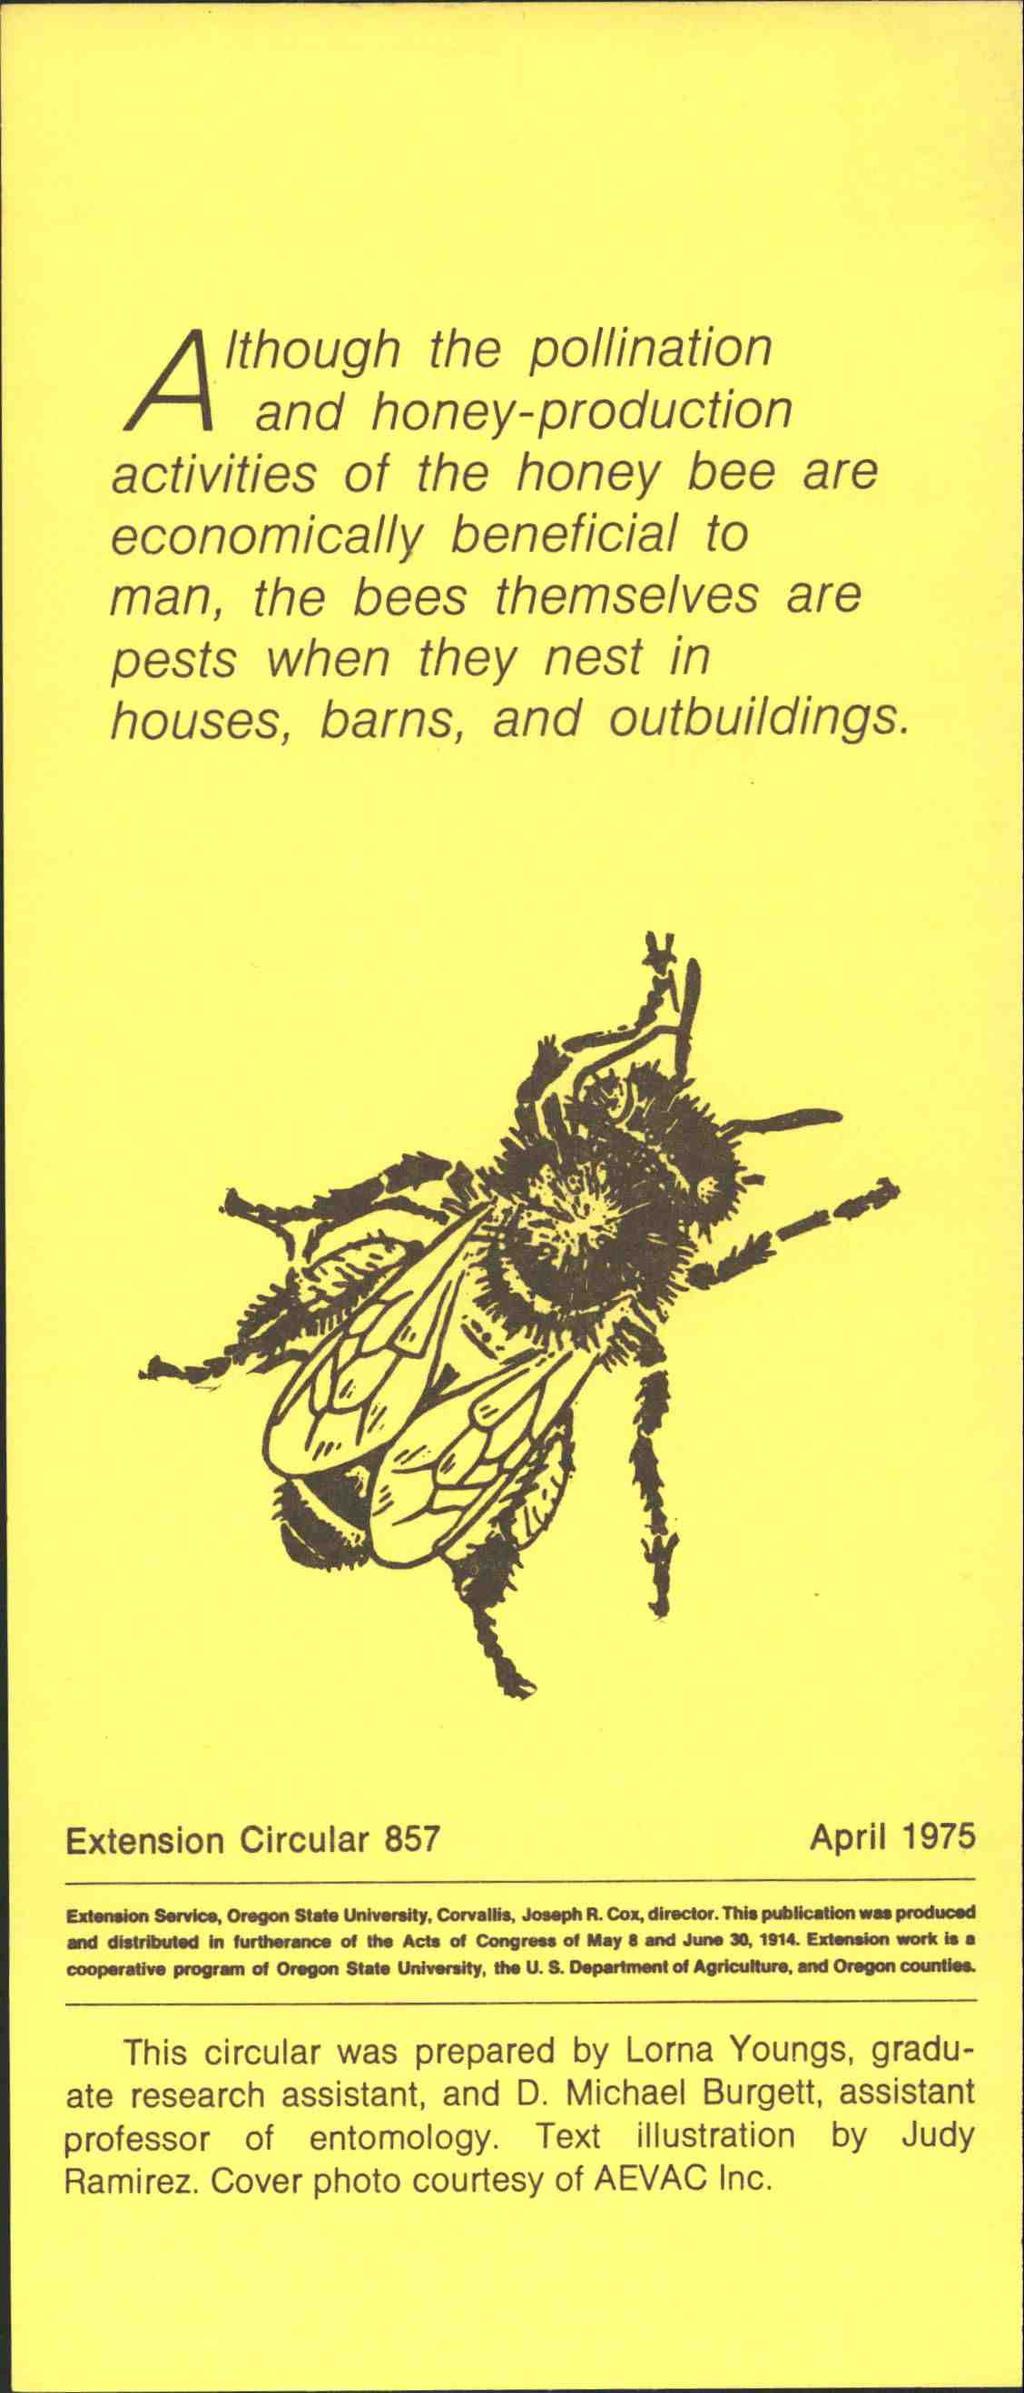 Although the pollination and honey-production activities of the honey bee are economically beneficial to man, the bees themselves are pests when they nest in houses, barns, and outbuildings.